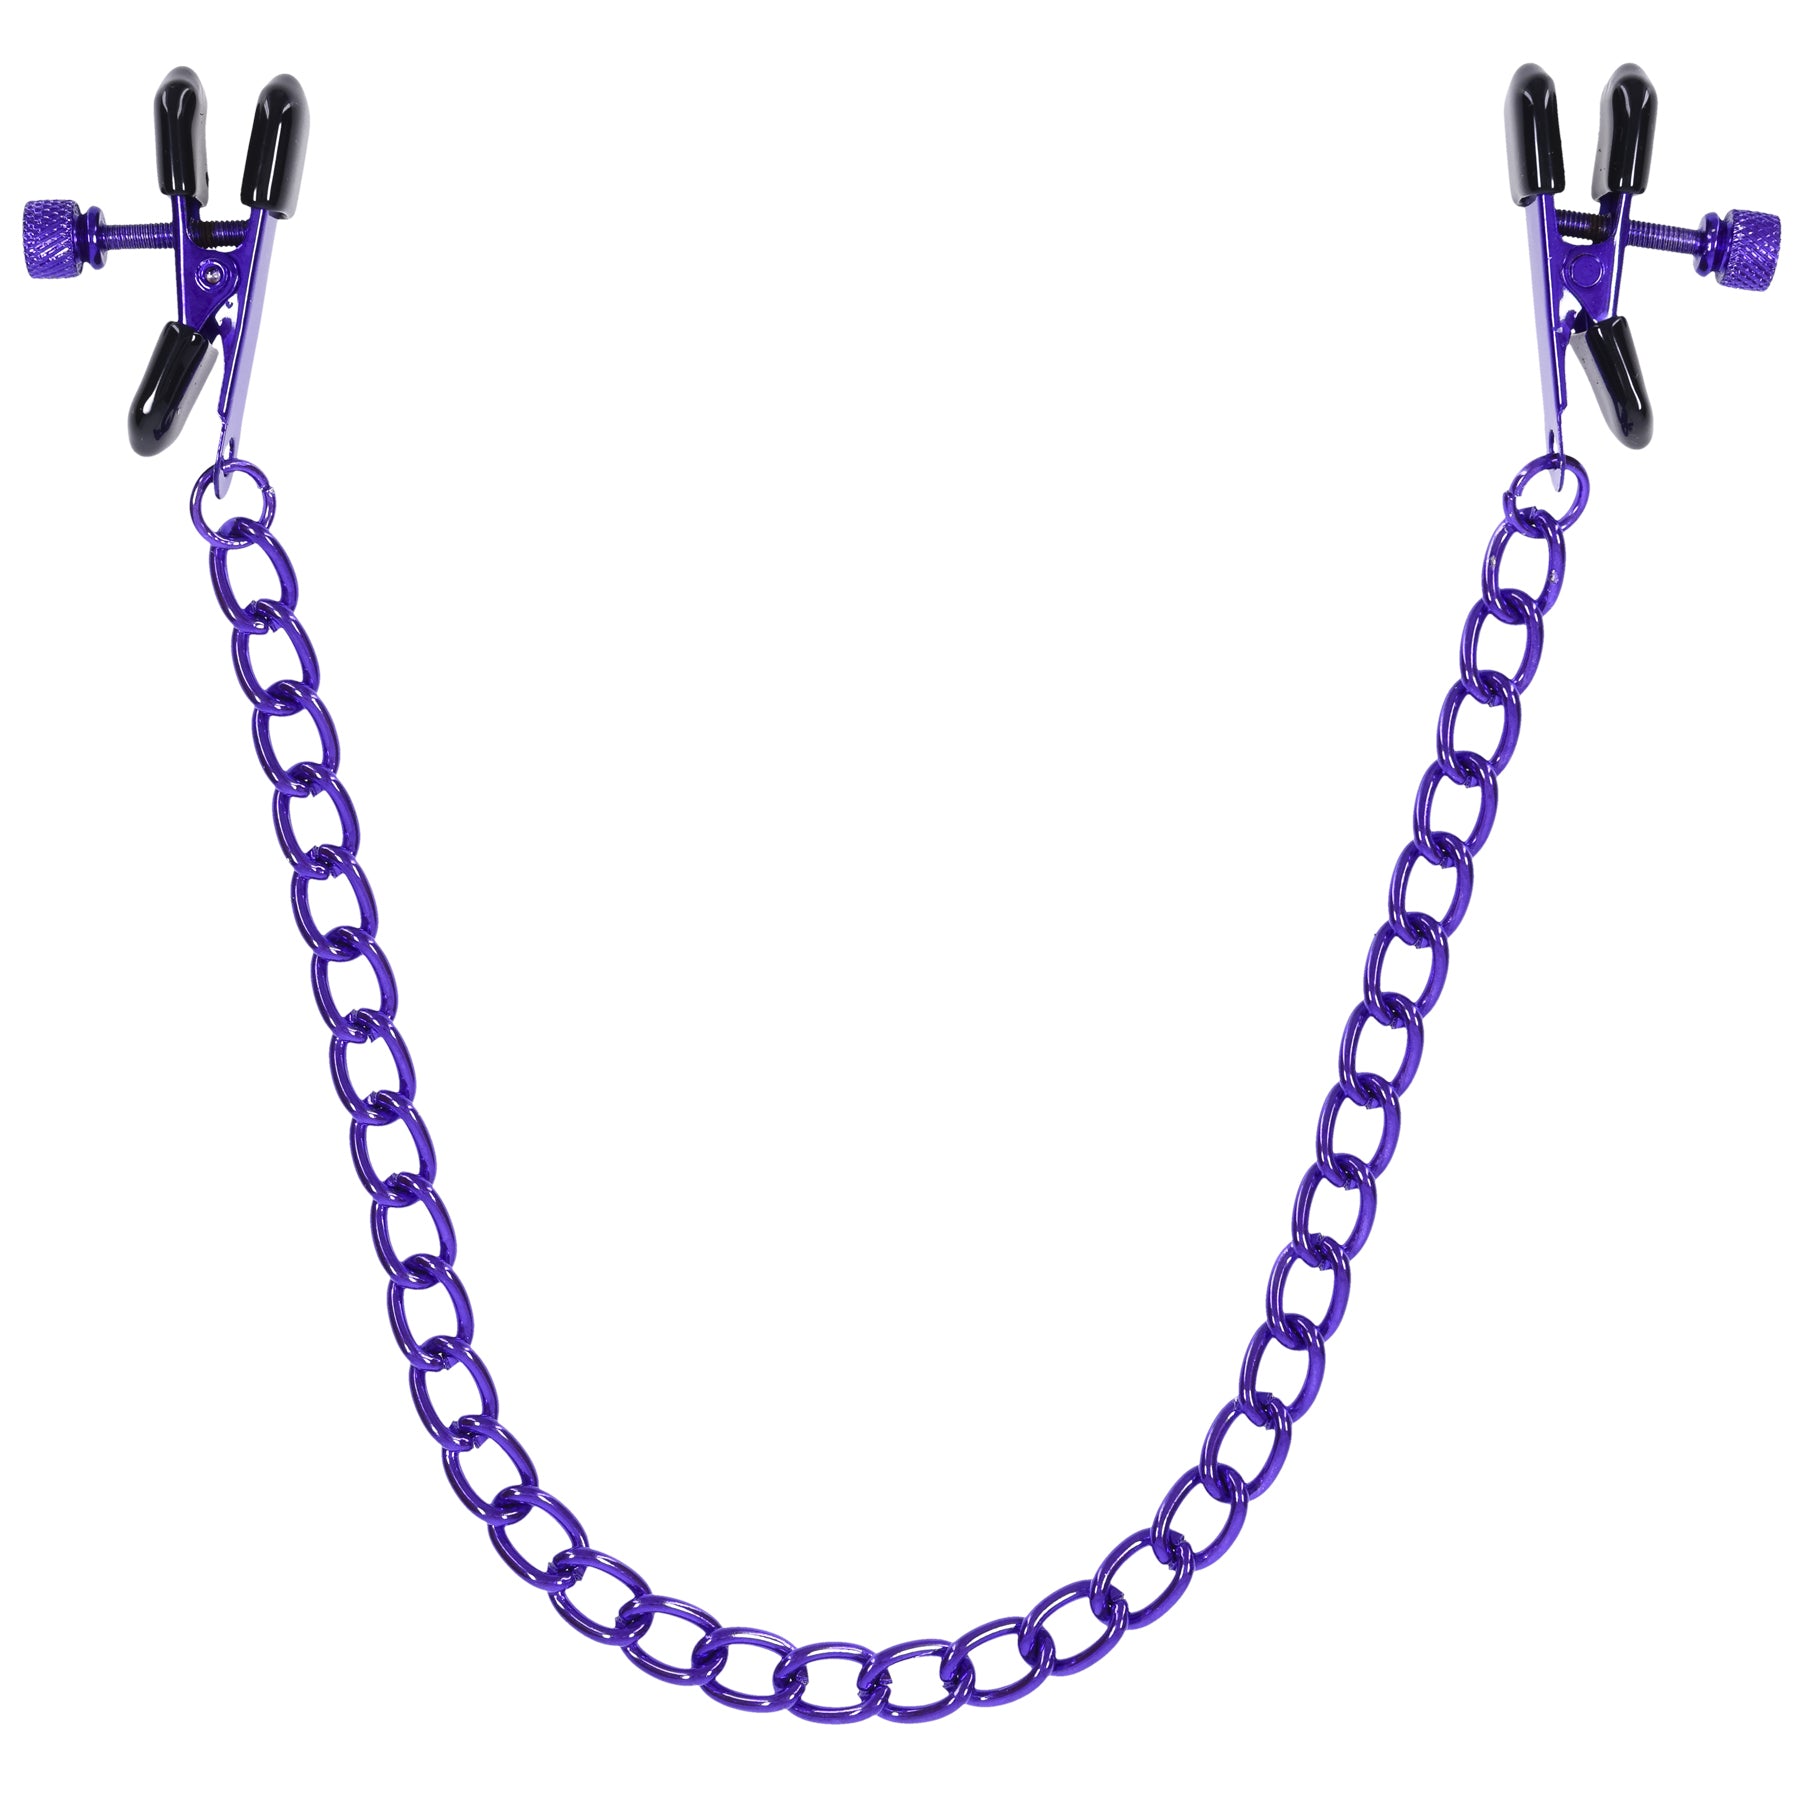 Merci - Chained Up - Nipple Clamps - Violet/black-3